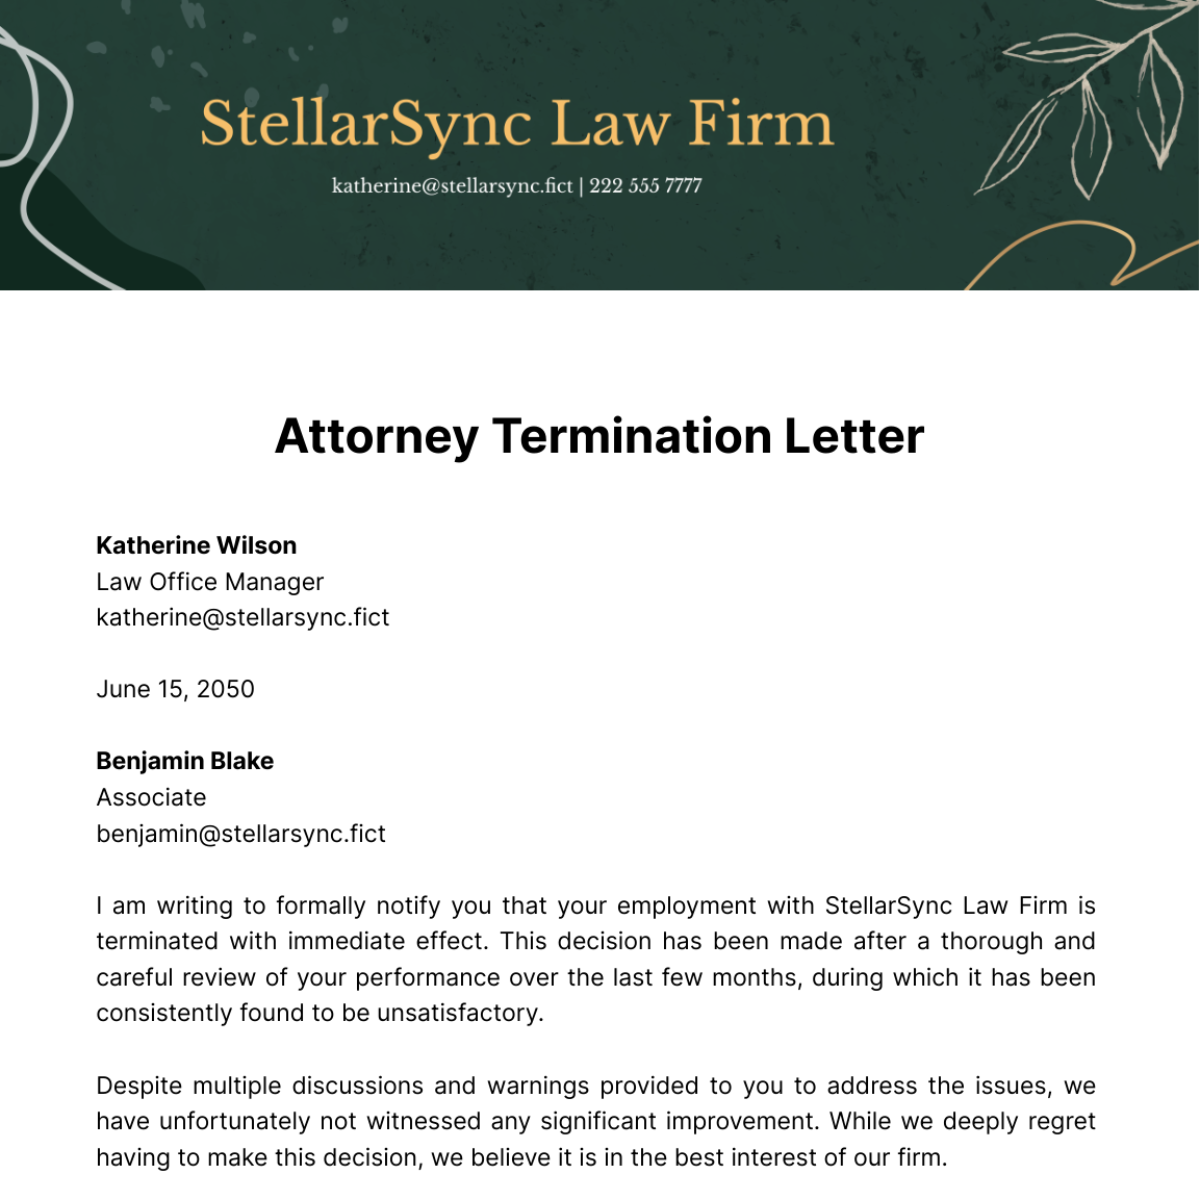 Attorney Termination Letter Template